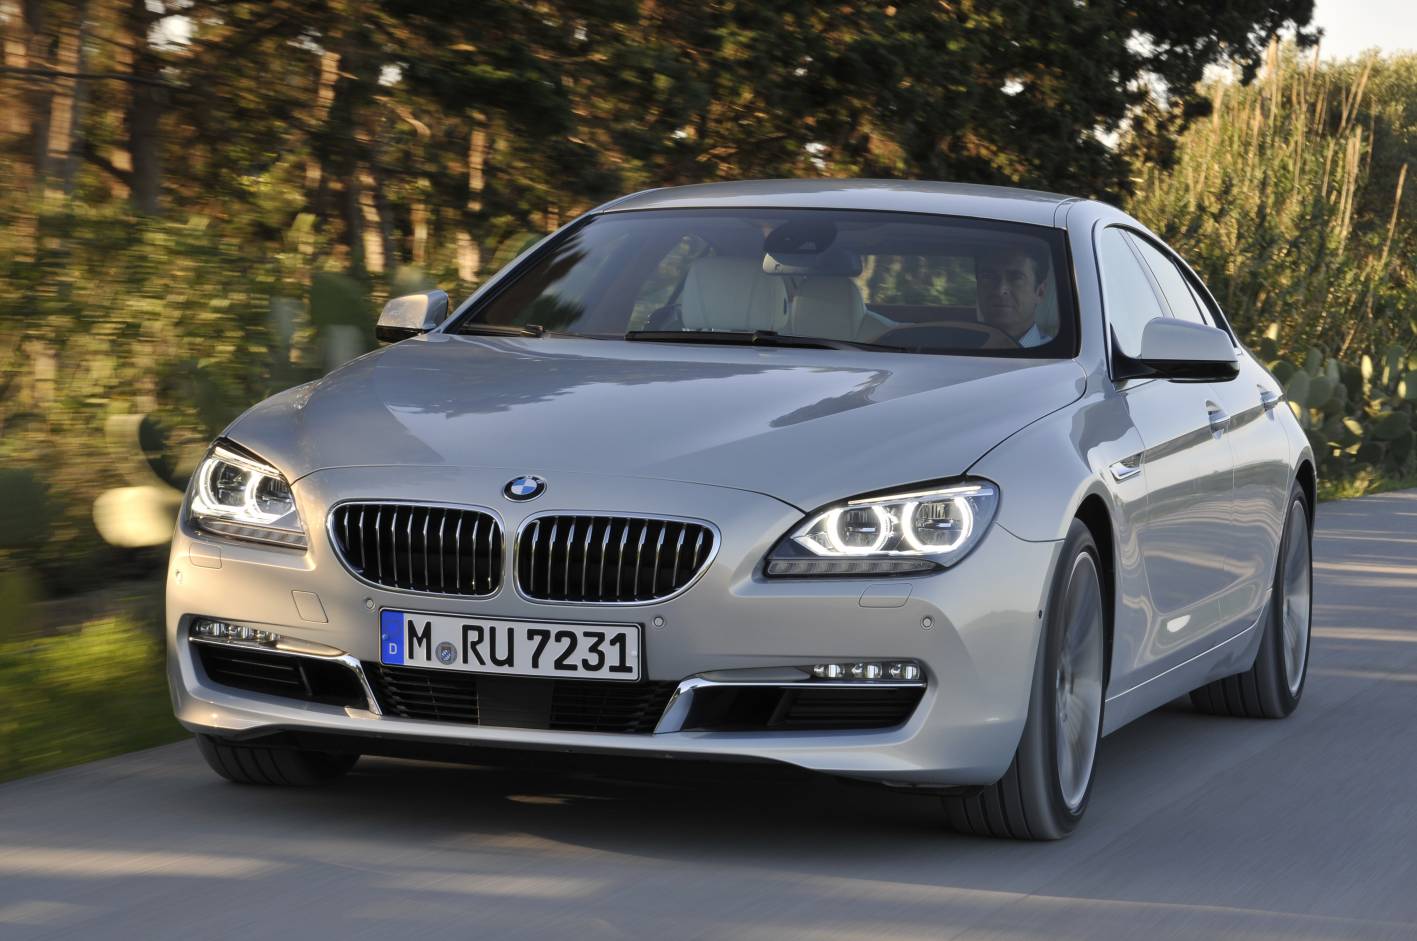 BMW retains global sales lead over Audi & Mercedes-Benz